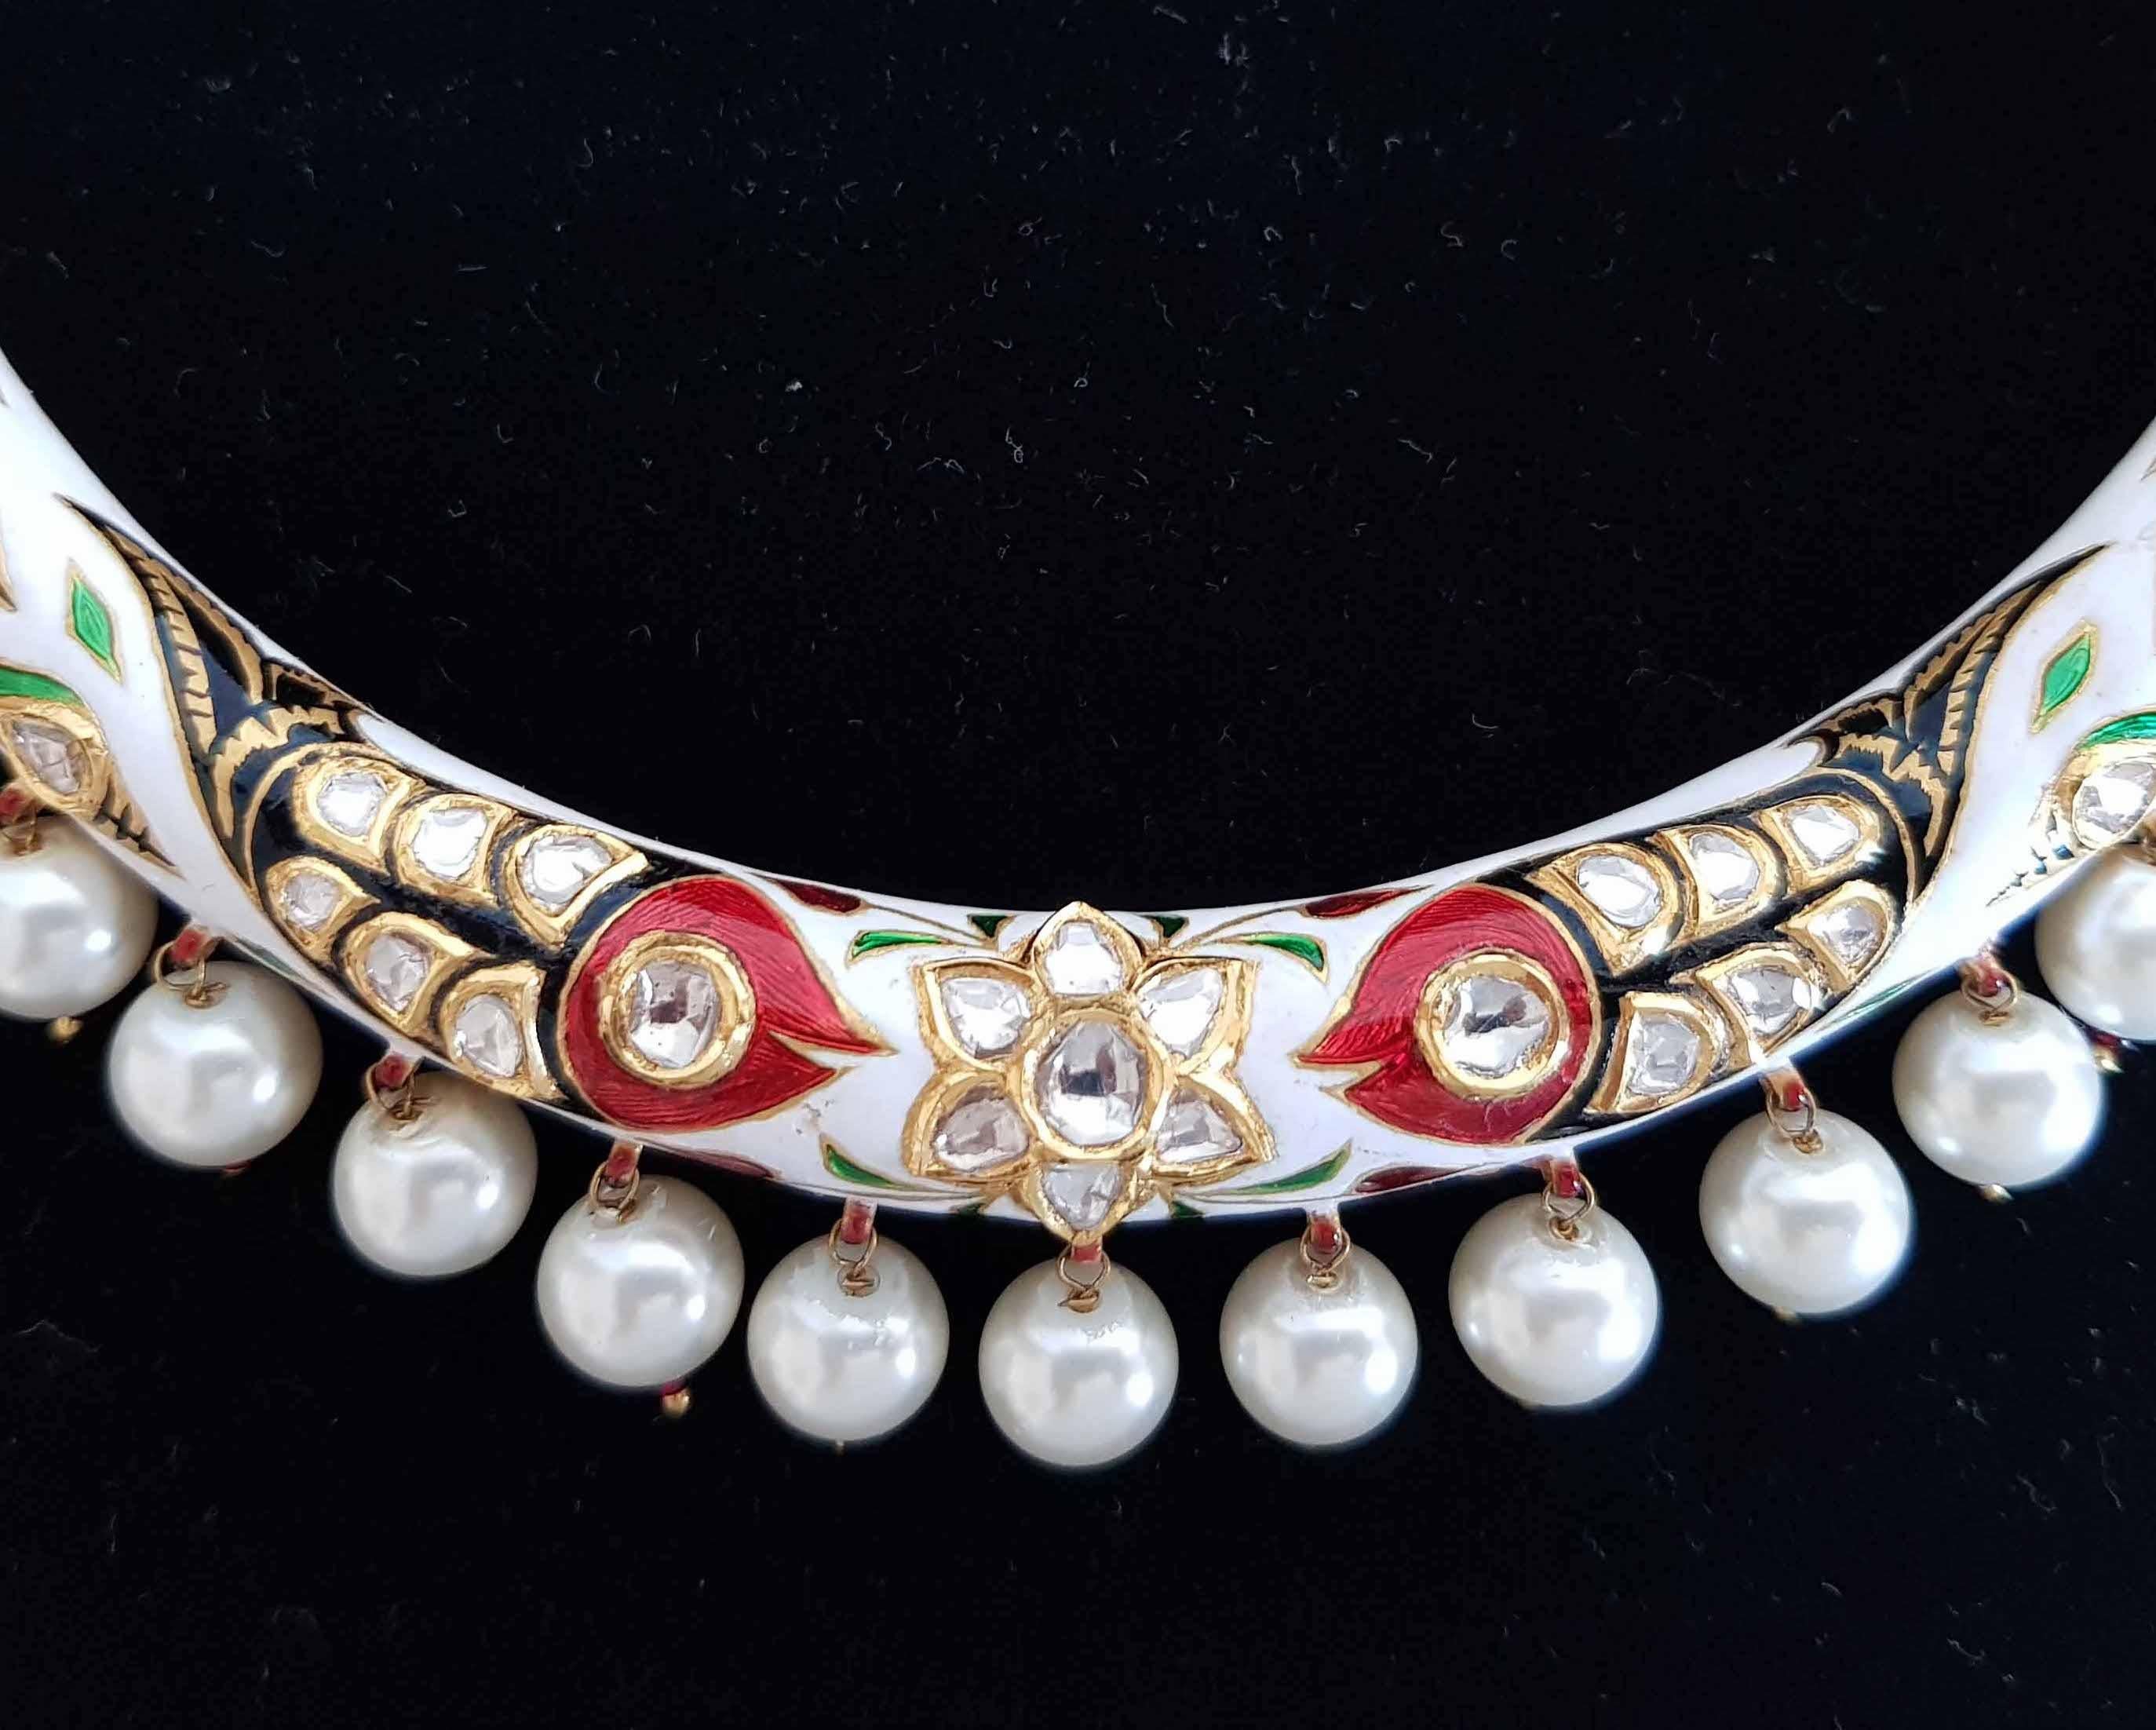 The epitome of feminine style and sophistication, this intricate handcrafted necklace is made in 22k gold featuring polkis (uncut diamonds) in the centre of motifs. Accentuated with Pearl drops and work at the back of necklace.
Adjustable at the